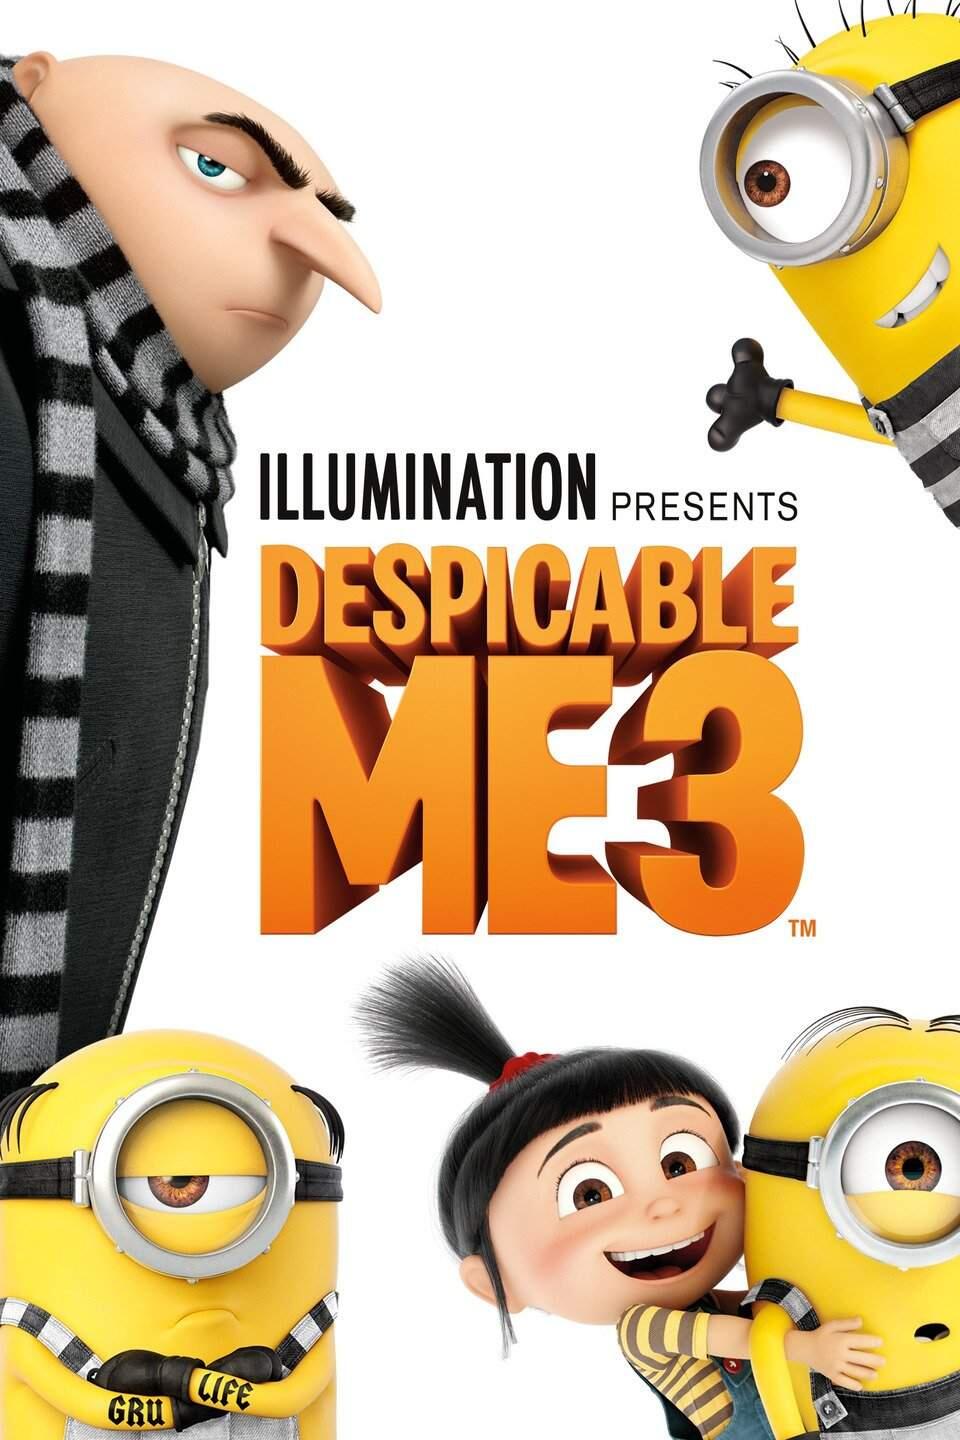 Cute kids, bumbling minions, and Gru all return for a third time in 'Despicable Me 3,' screening on Aug. 9 at Luccesi Park.